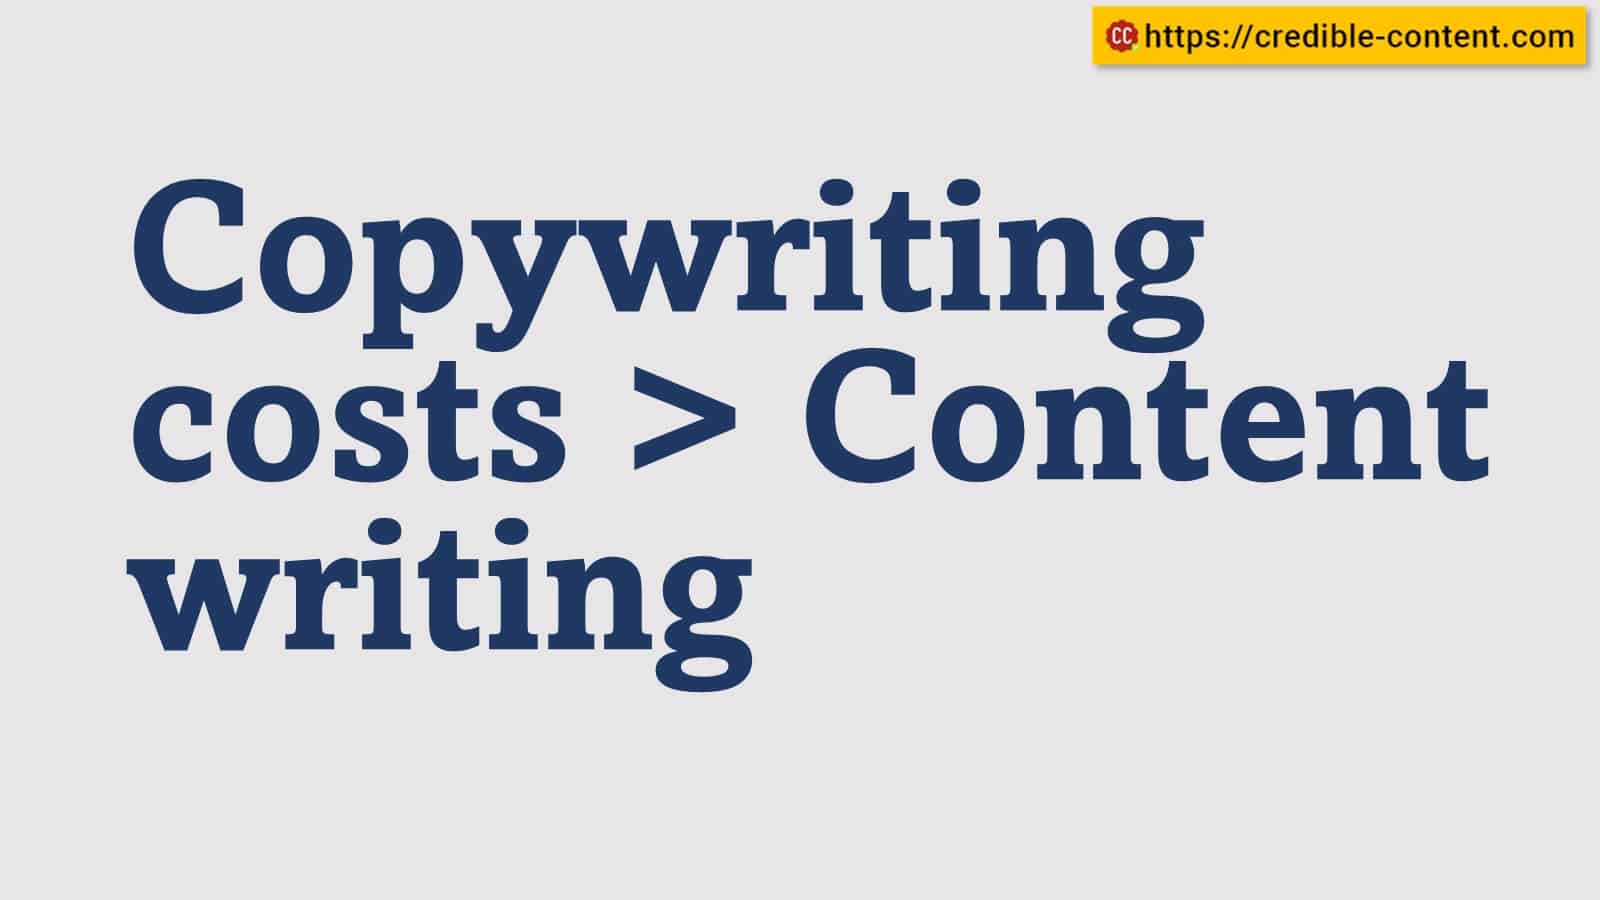 Copywriting costs more than content writing